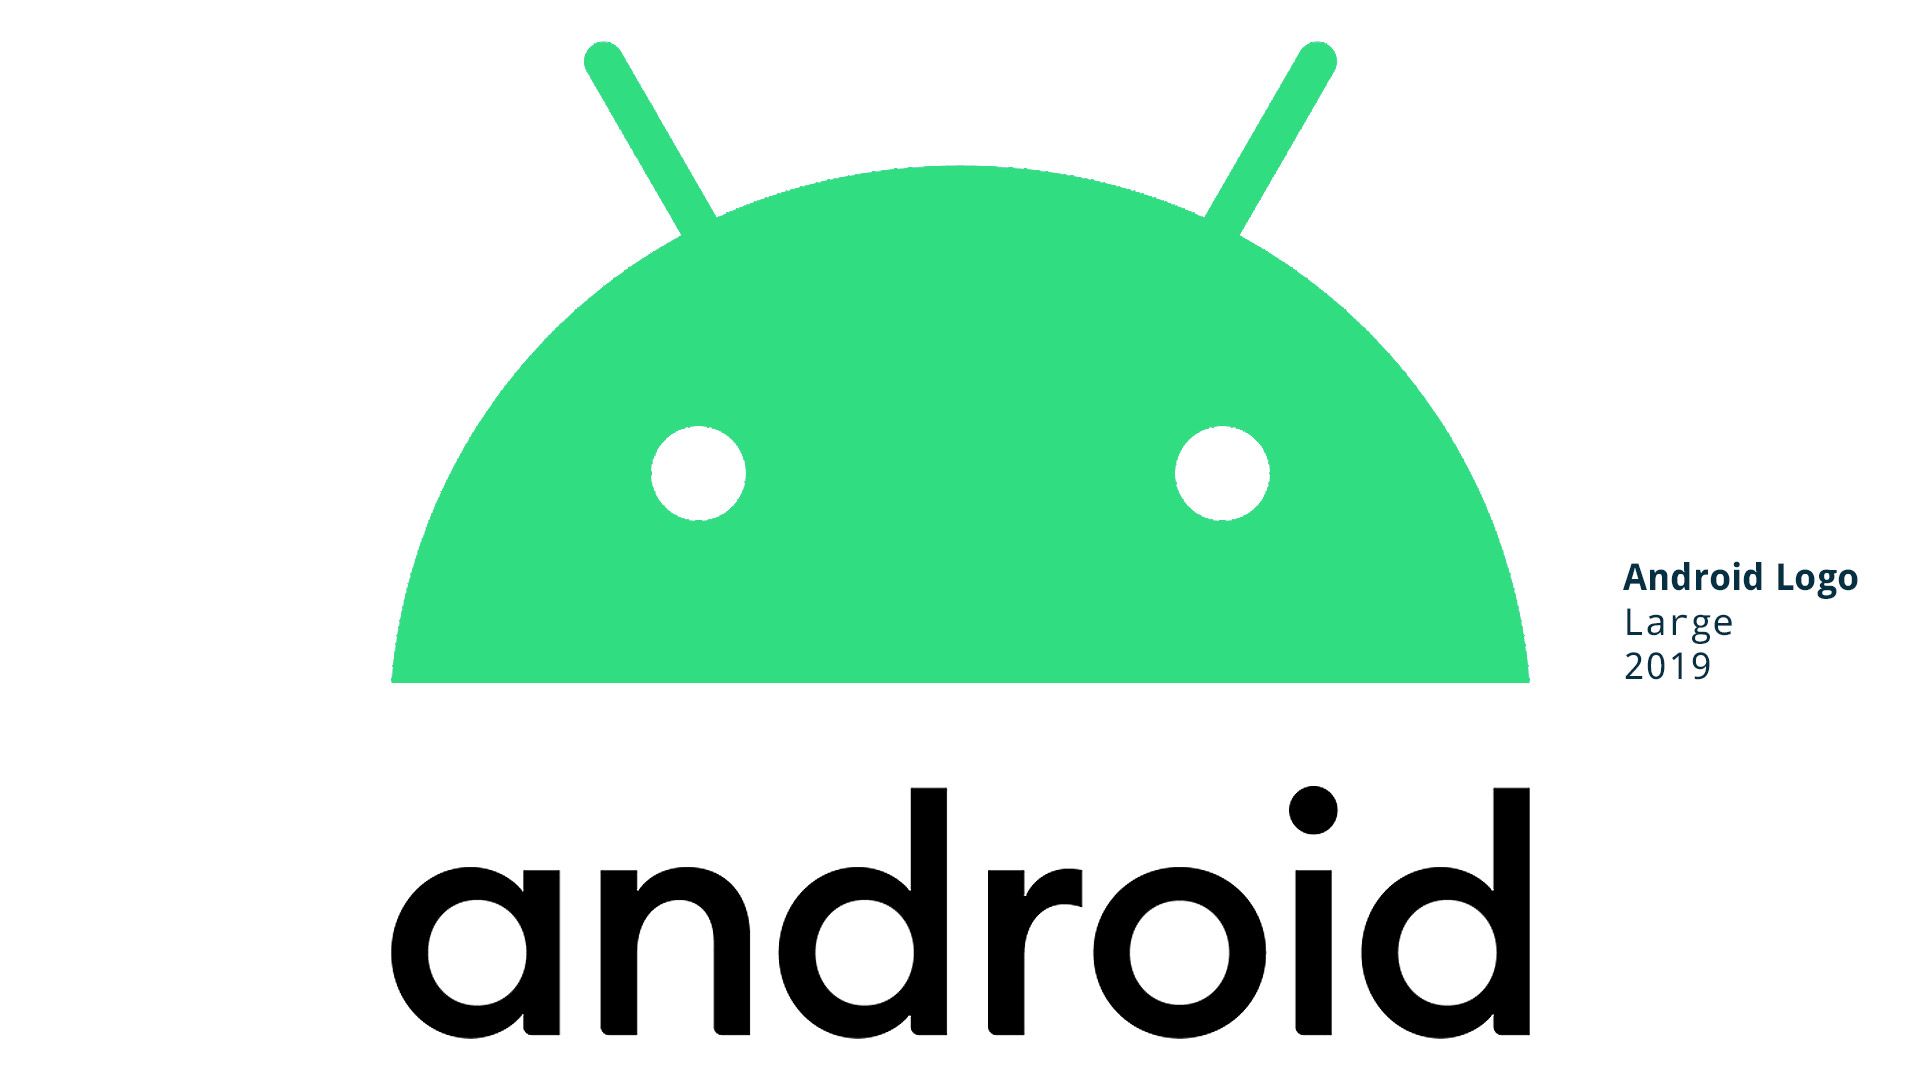 New Android logo and brand update for 2019